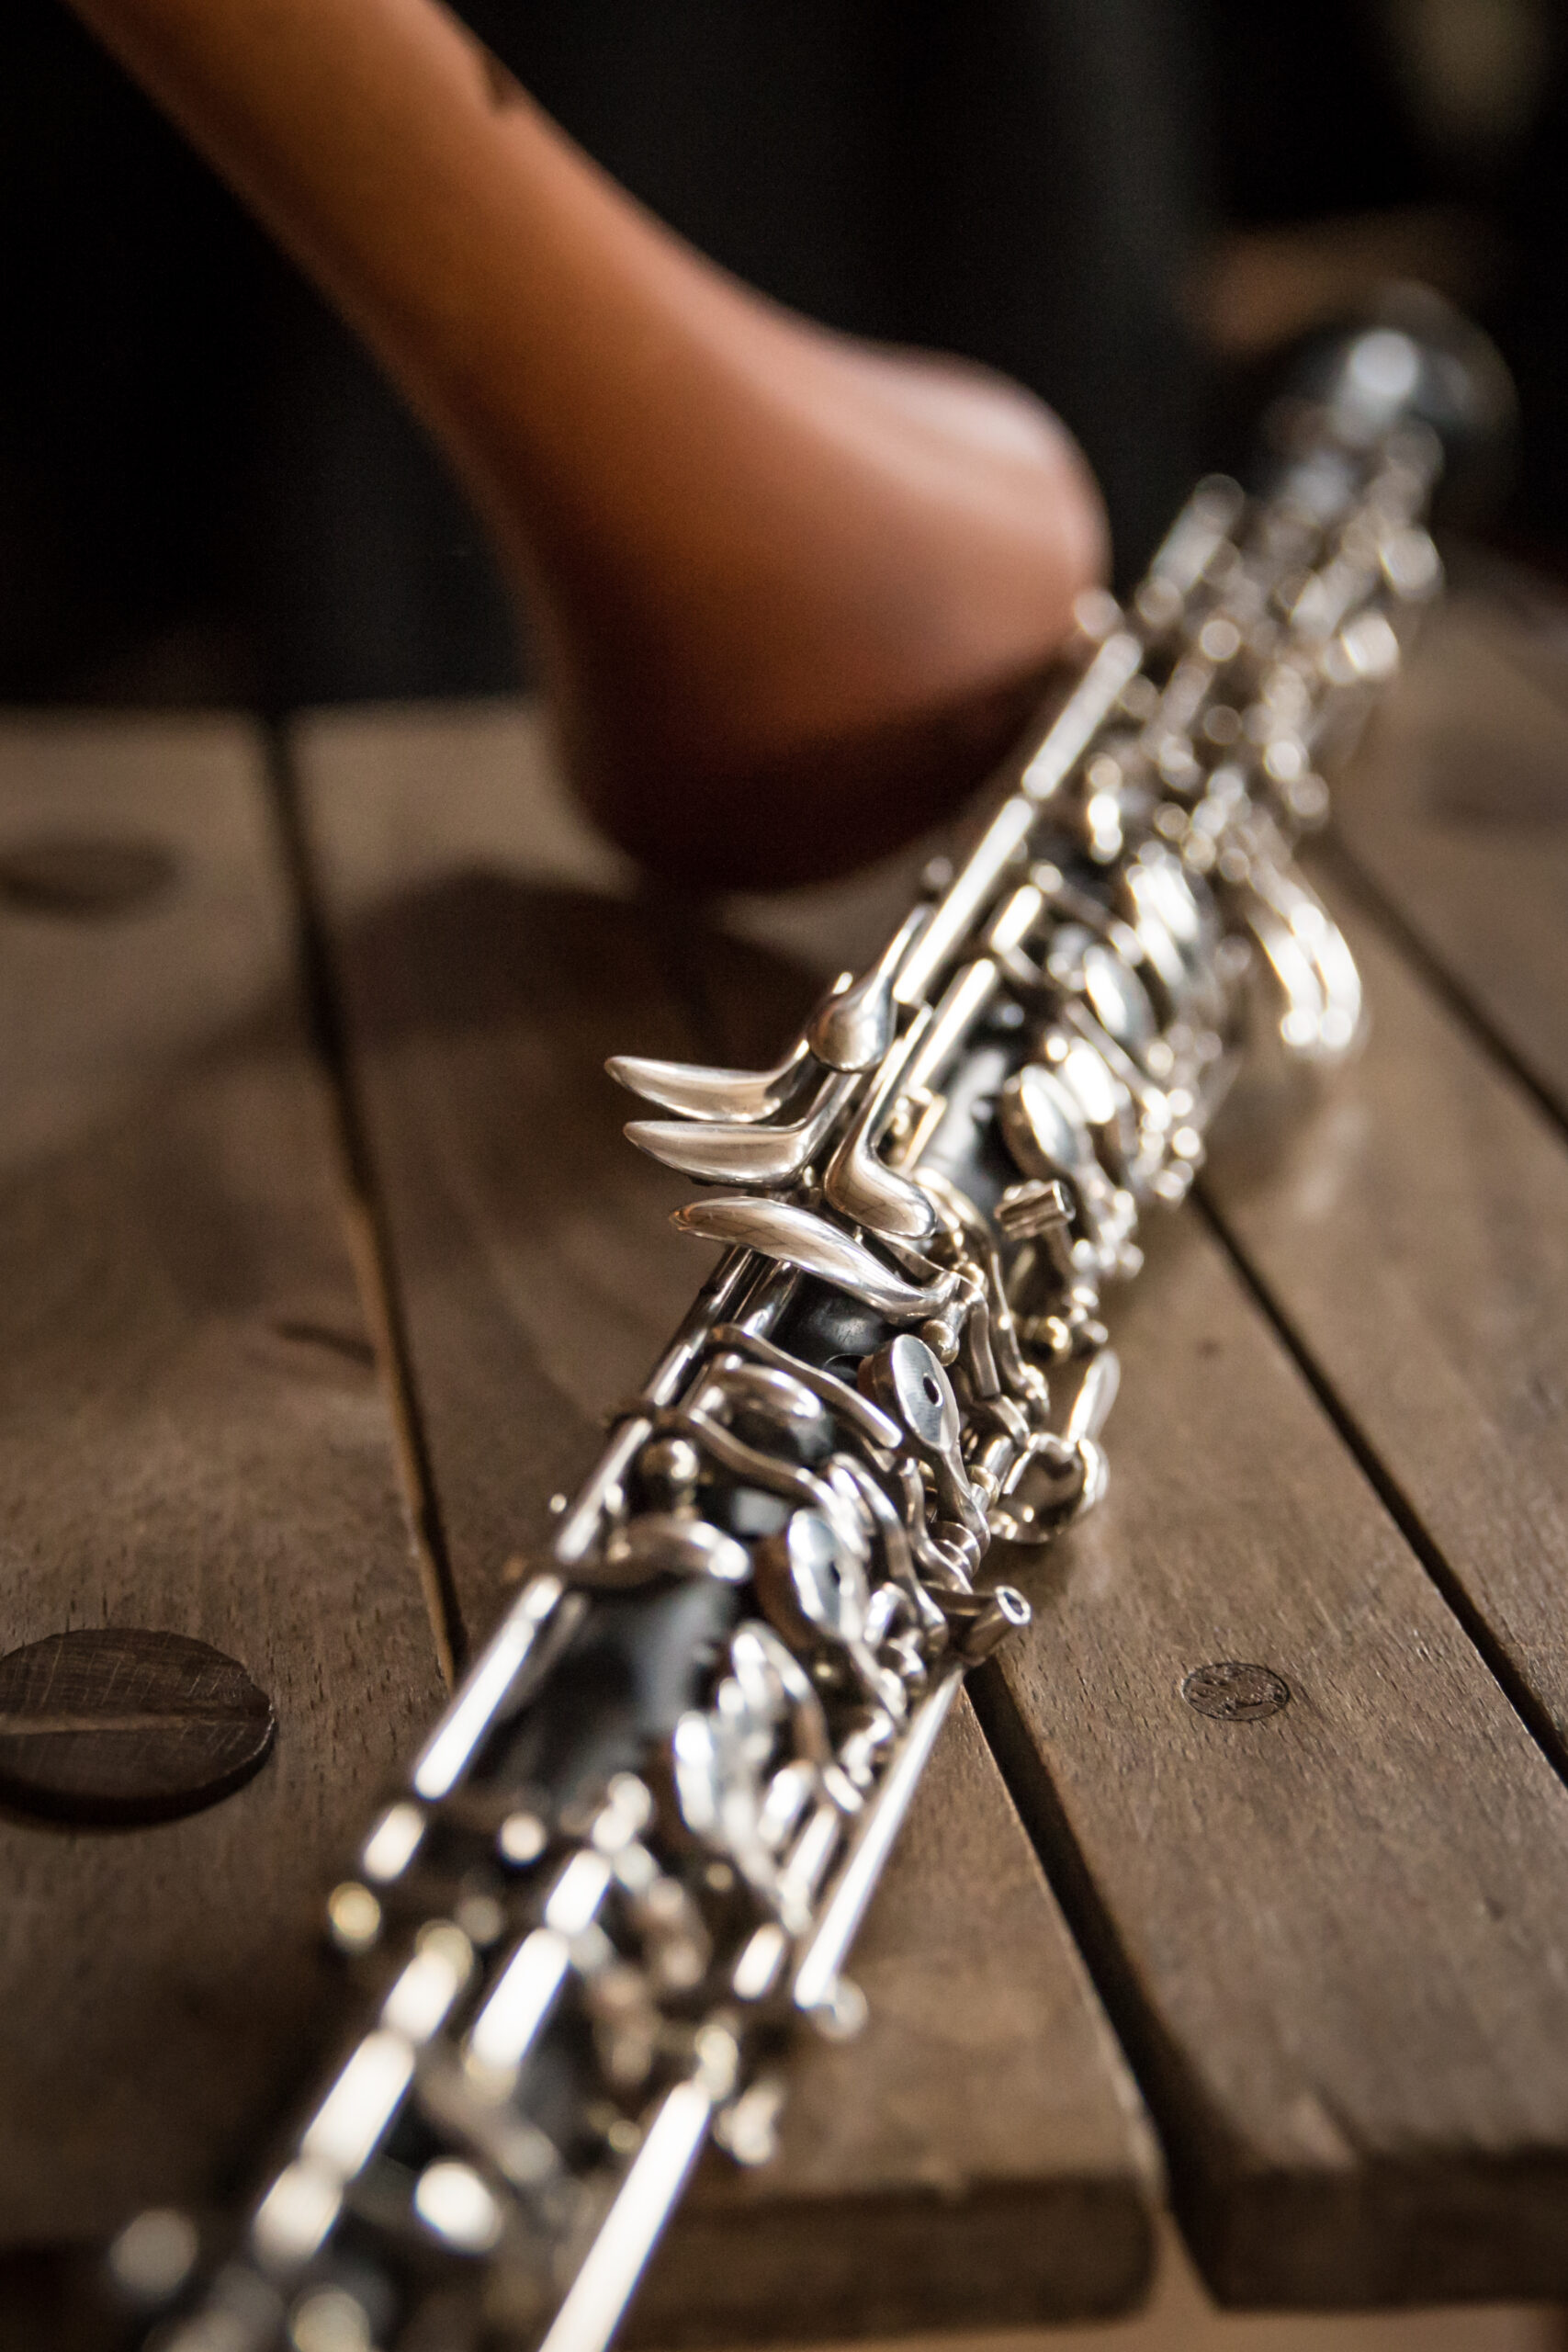 Oboe: A musical instrument played by blowing through a double reed in the top end. 1710x2560 HD Wallpaper.